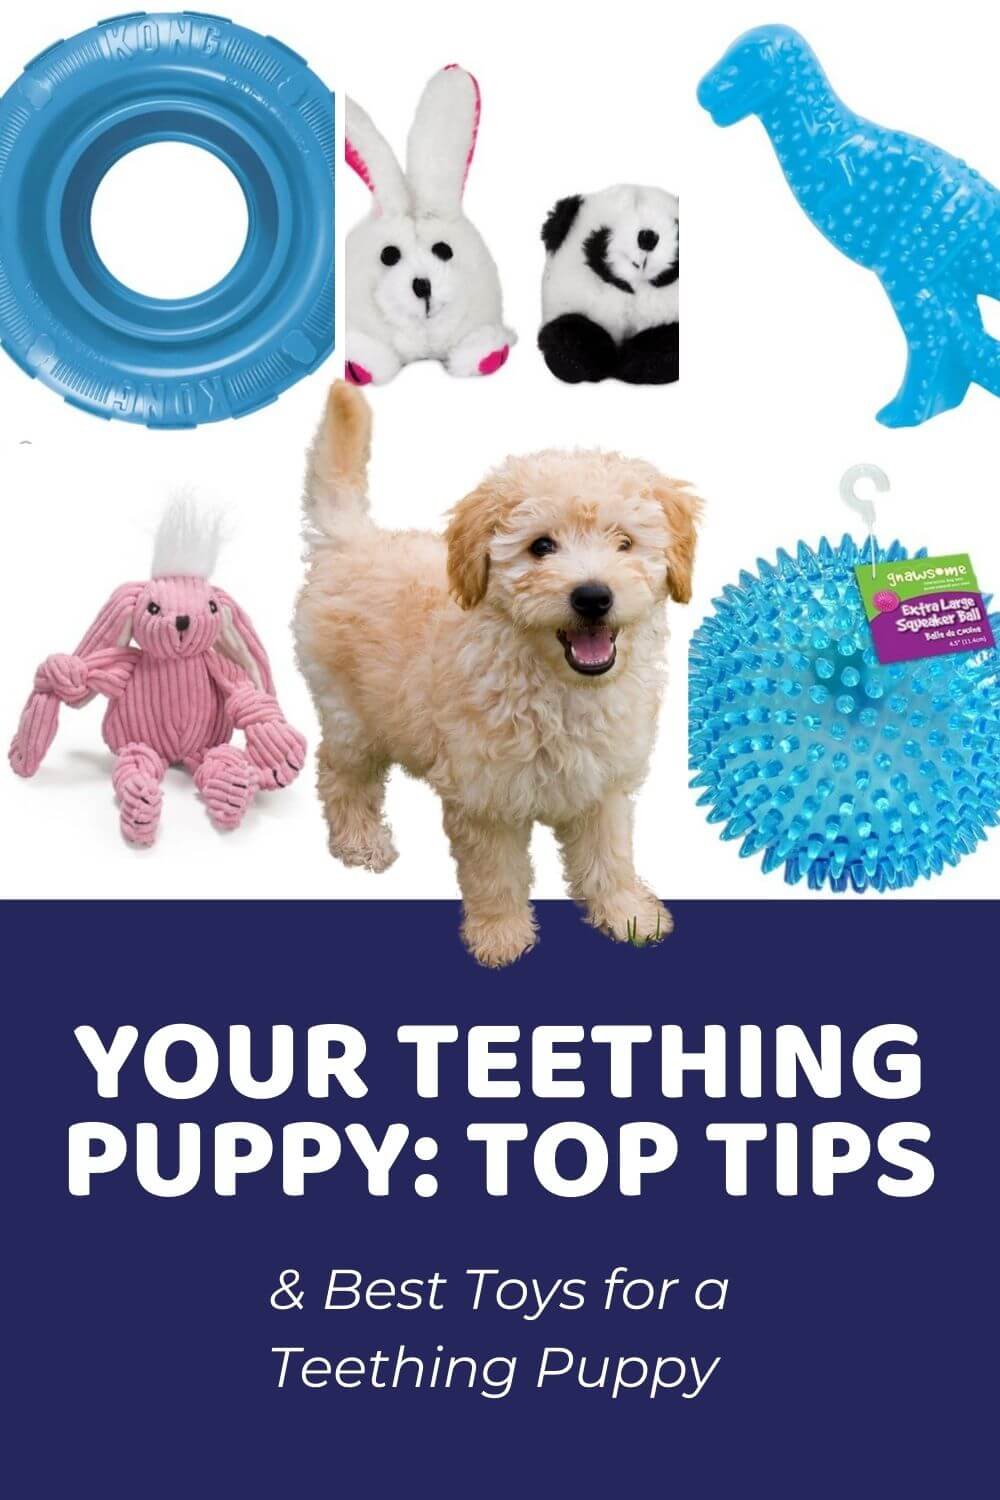 Top Tips for Caring for Your Teething Puppy - Doodle Doods